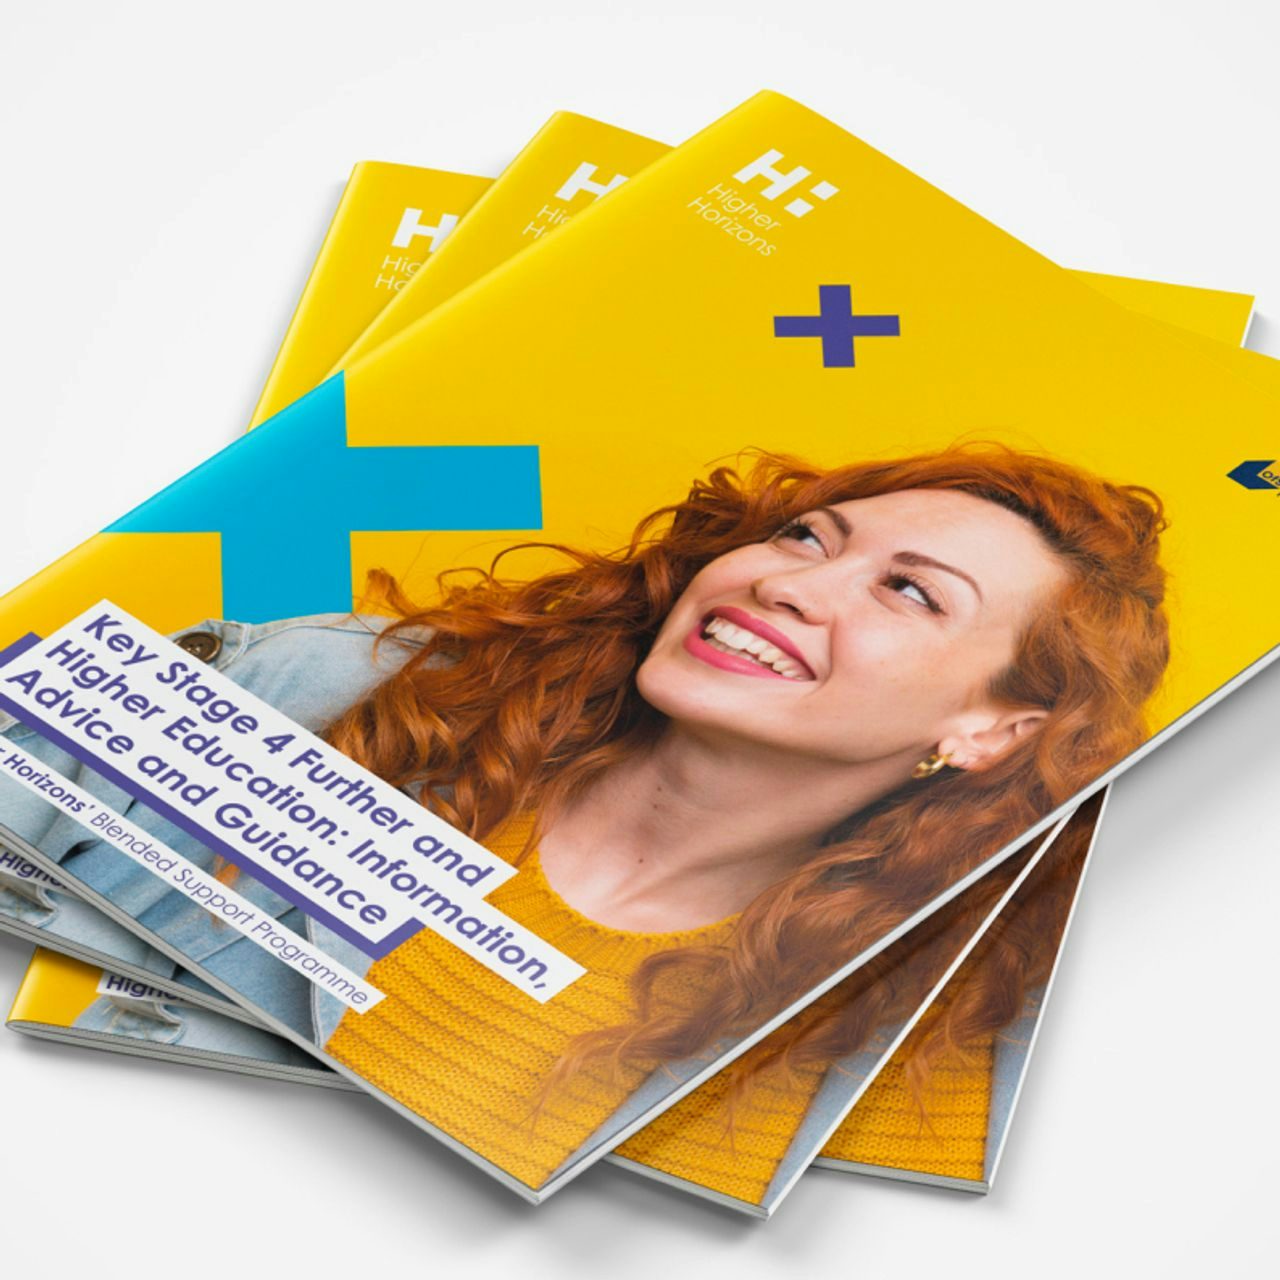 Stack of yellow educational brochures on Key Stage 4 and higher education advice, featuring a joyful red-haired woman.